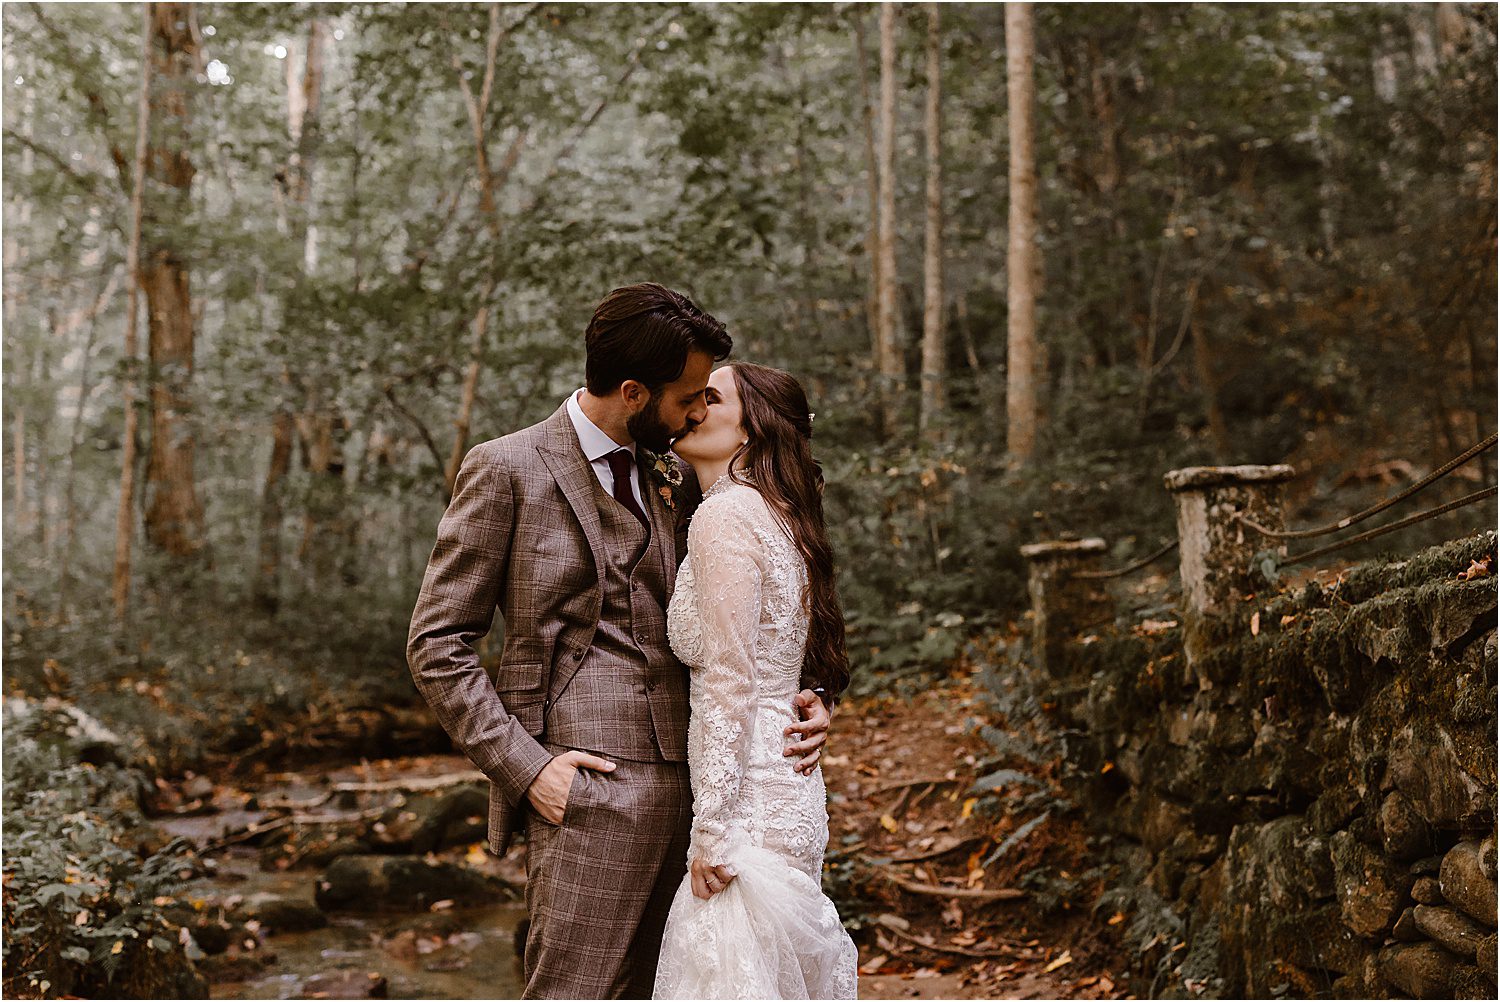 man and woman kiss next to stone bridge in forest fall setting